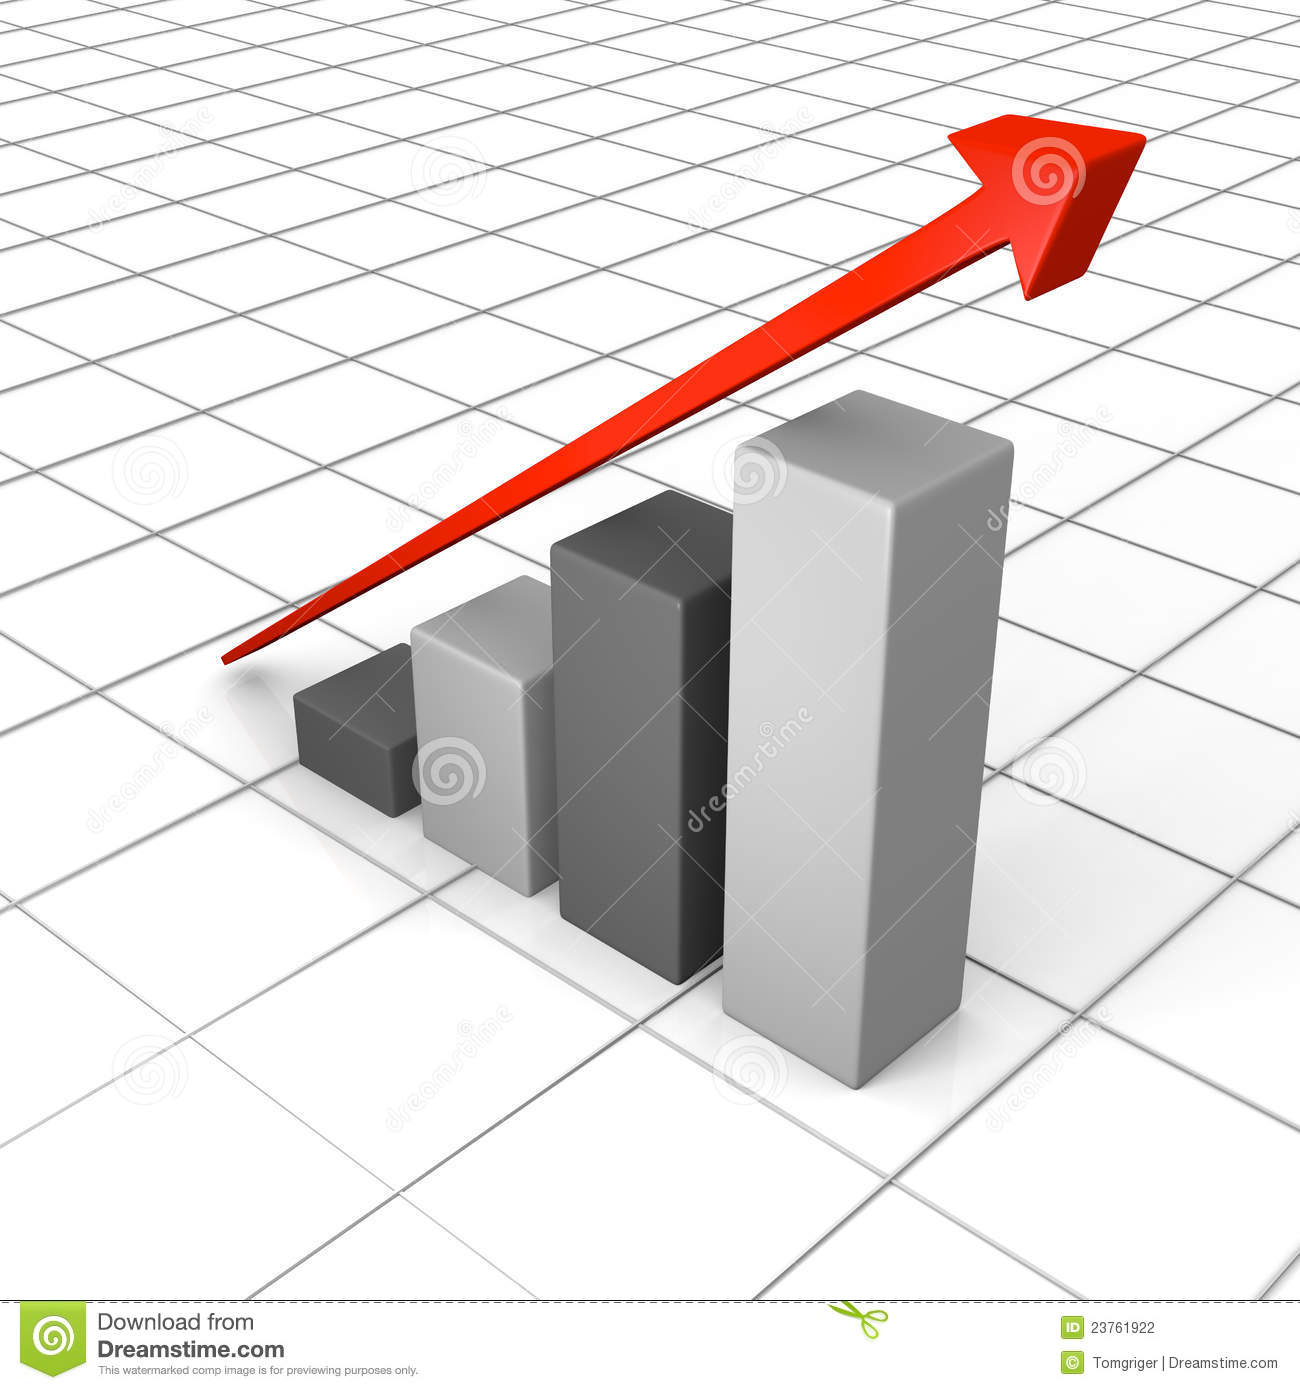 Growth Chart With Linear Trend Line Stock Photography   Image